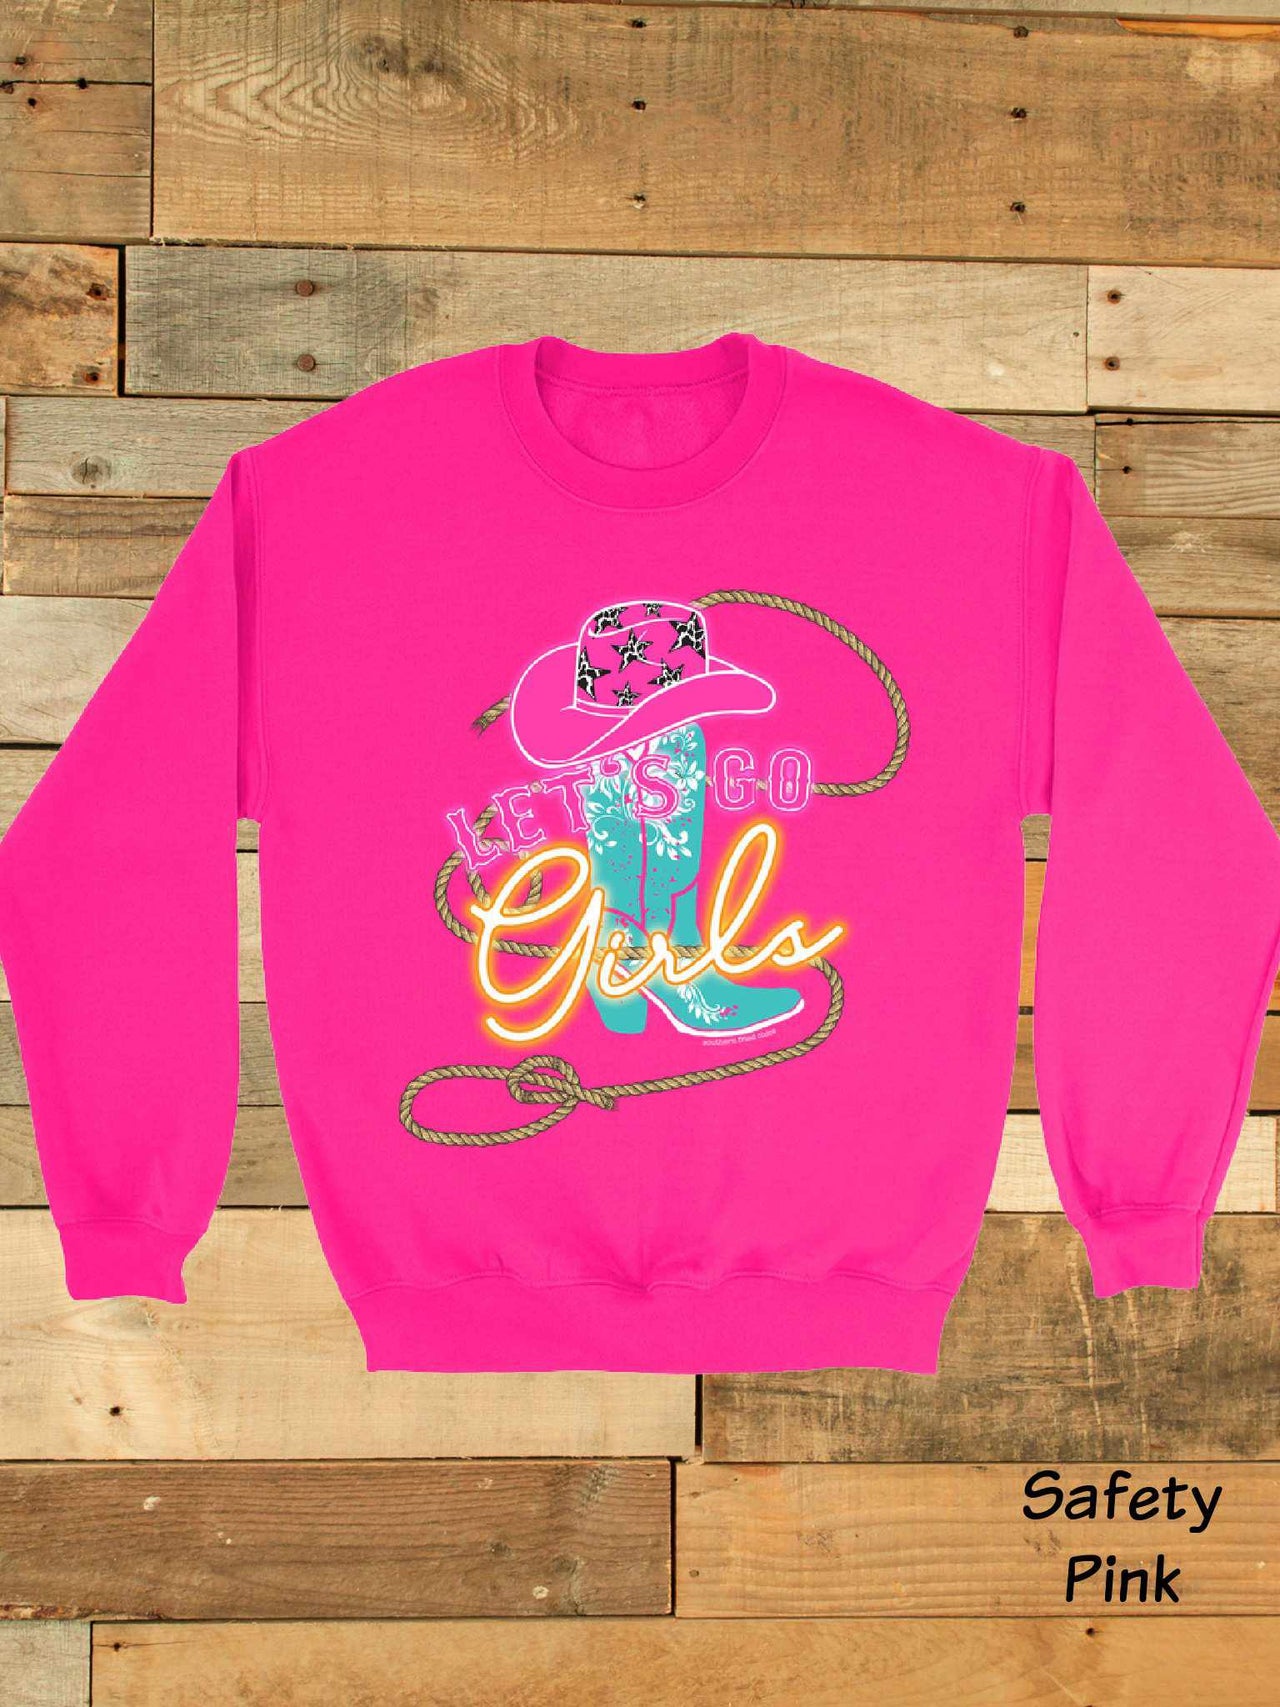 Let's Go Girls Sweatshirt - Multiple Colors-Southern Fried Chics